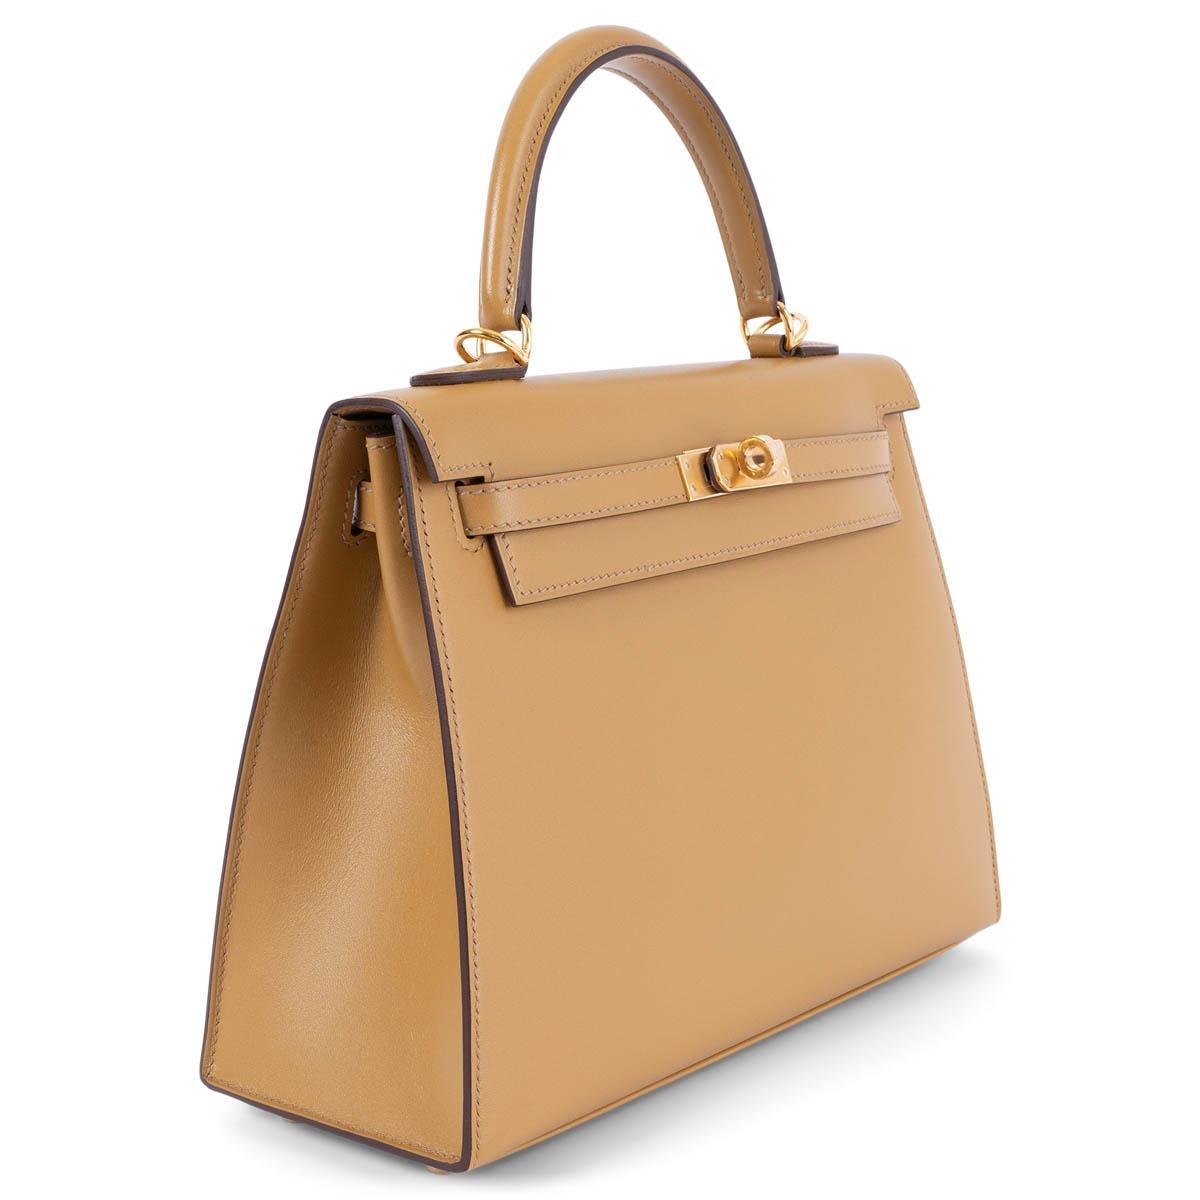 100% authentic Hermès Kelly 25 Sellier bag in Poussiere (ocher brown) Veau Tadelakt leather with gold-plated hardware. Lined in Chevre (goat skin) with an open pocket against the front and a zipper pocket against the back. Brand new - Comes with